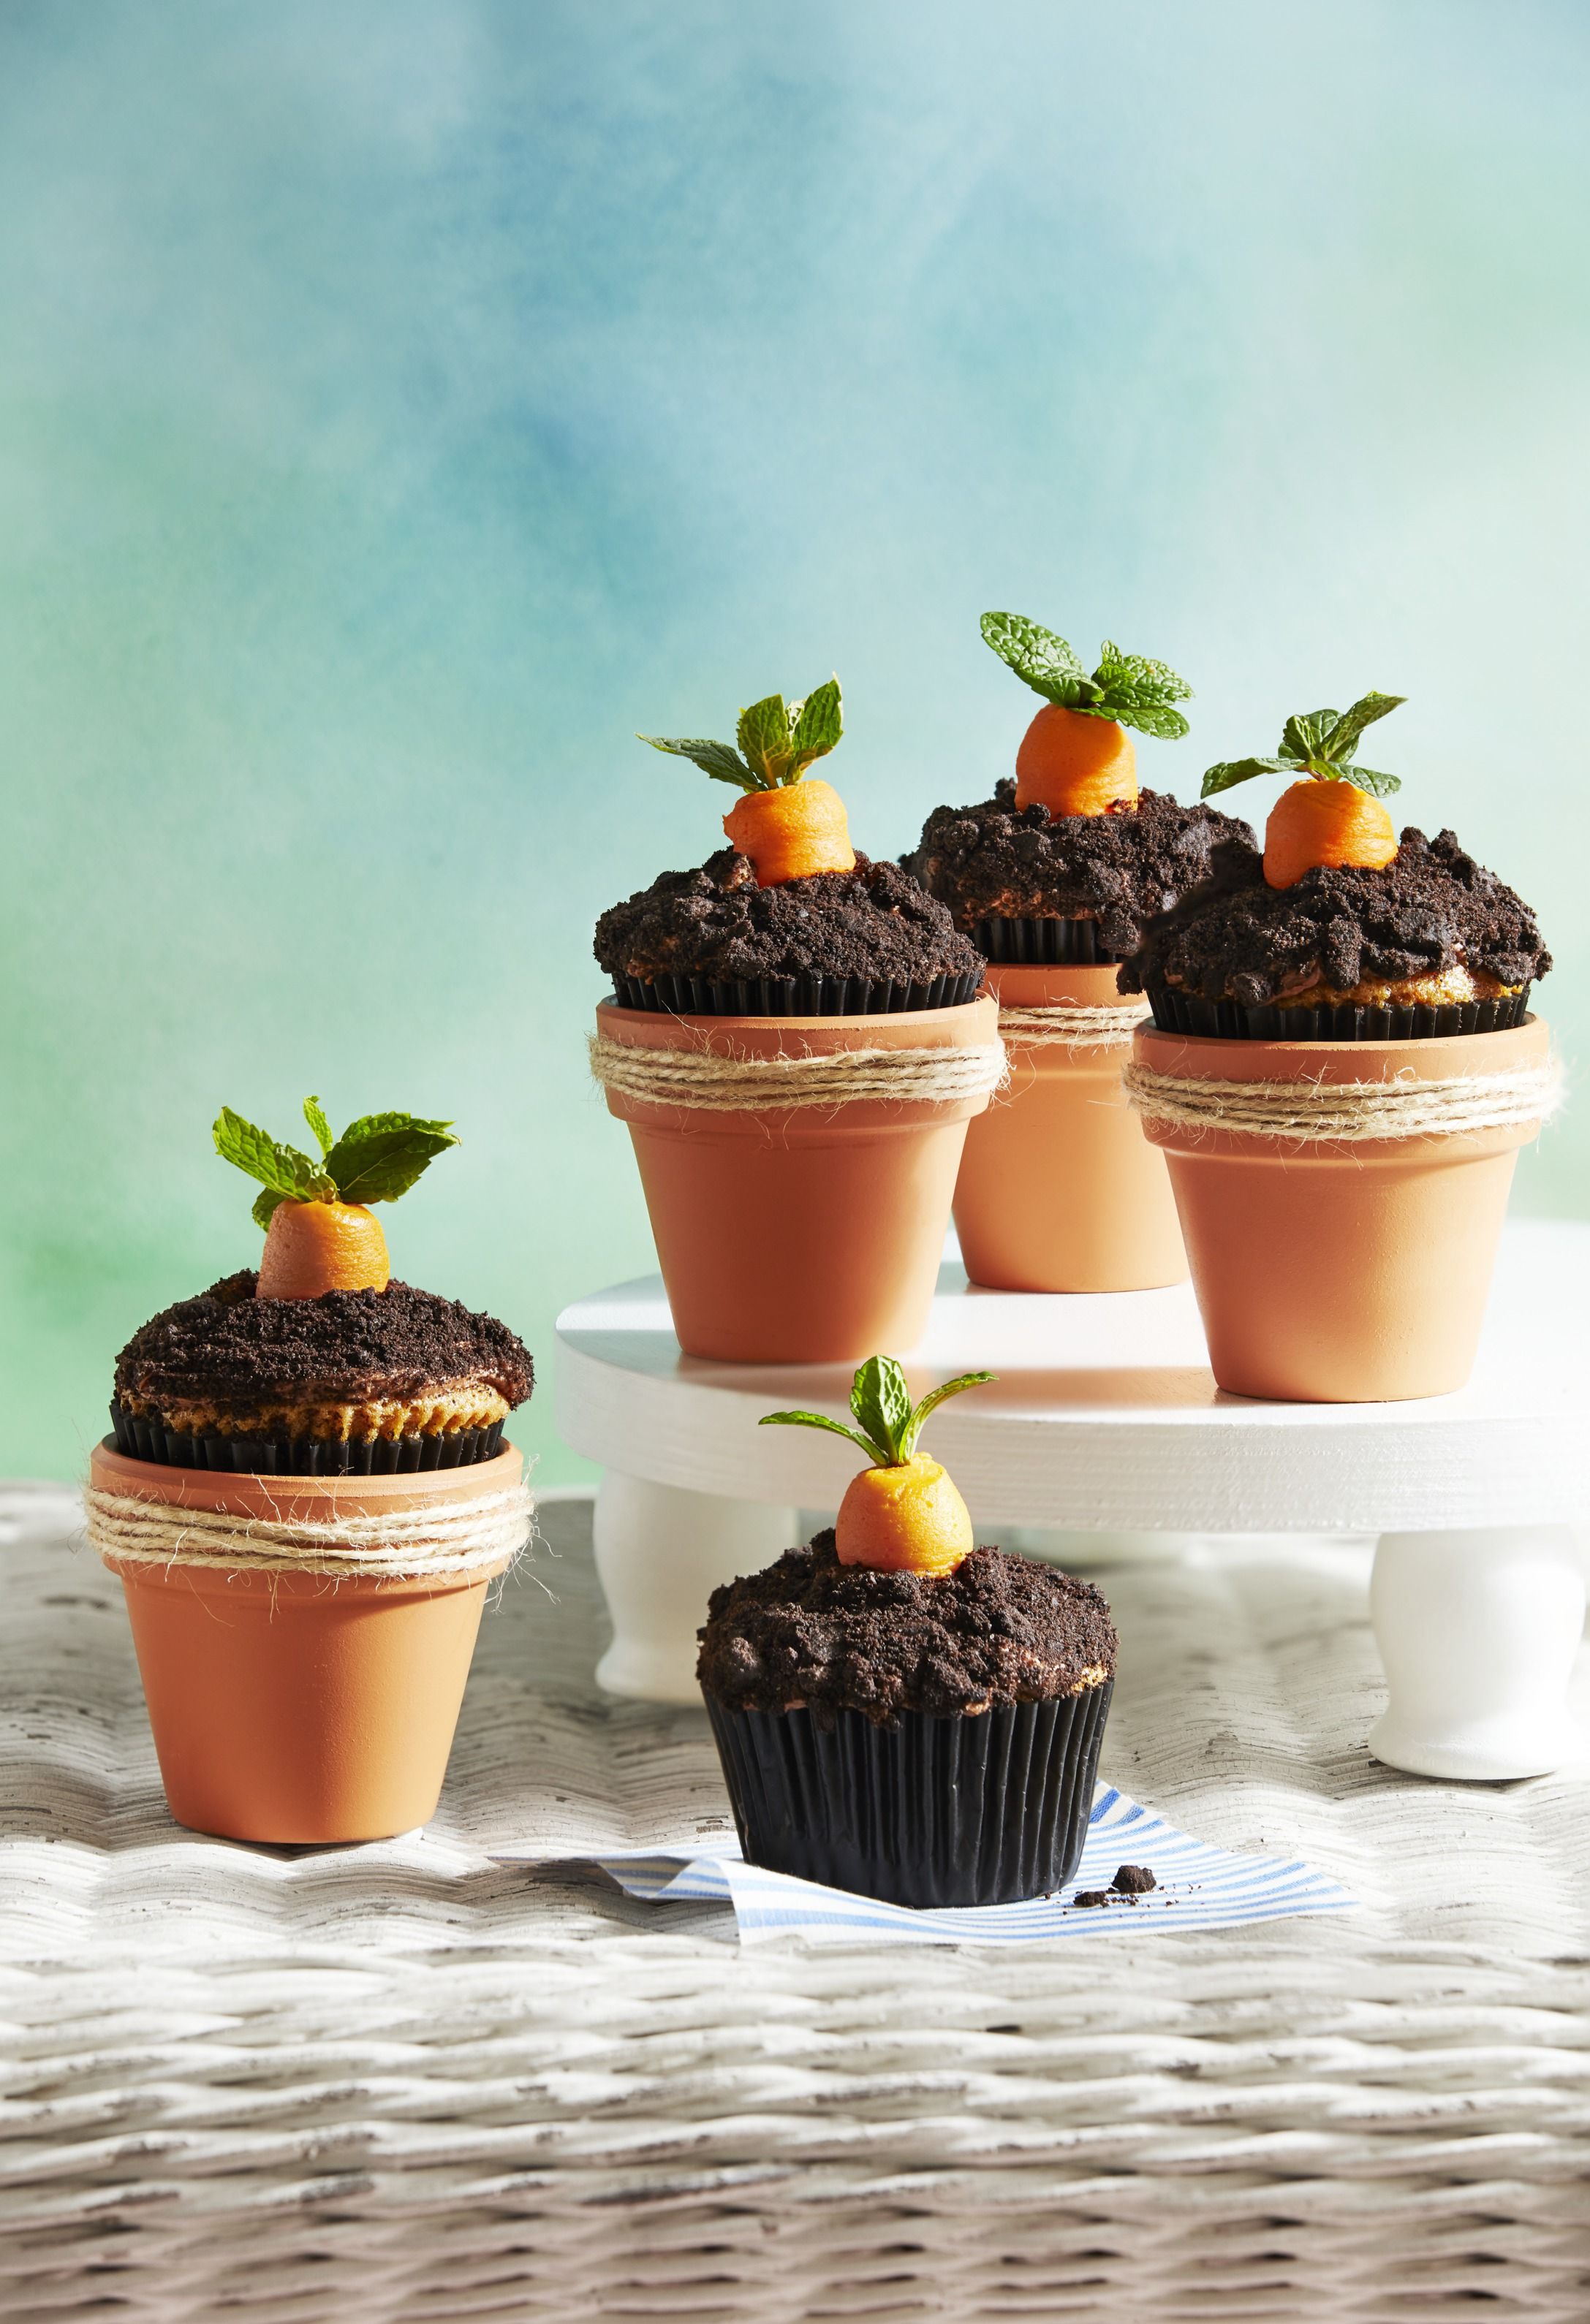 Carrot Patch Cupcakes recipe